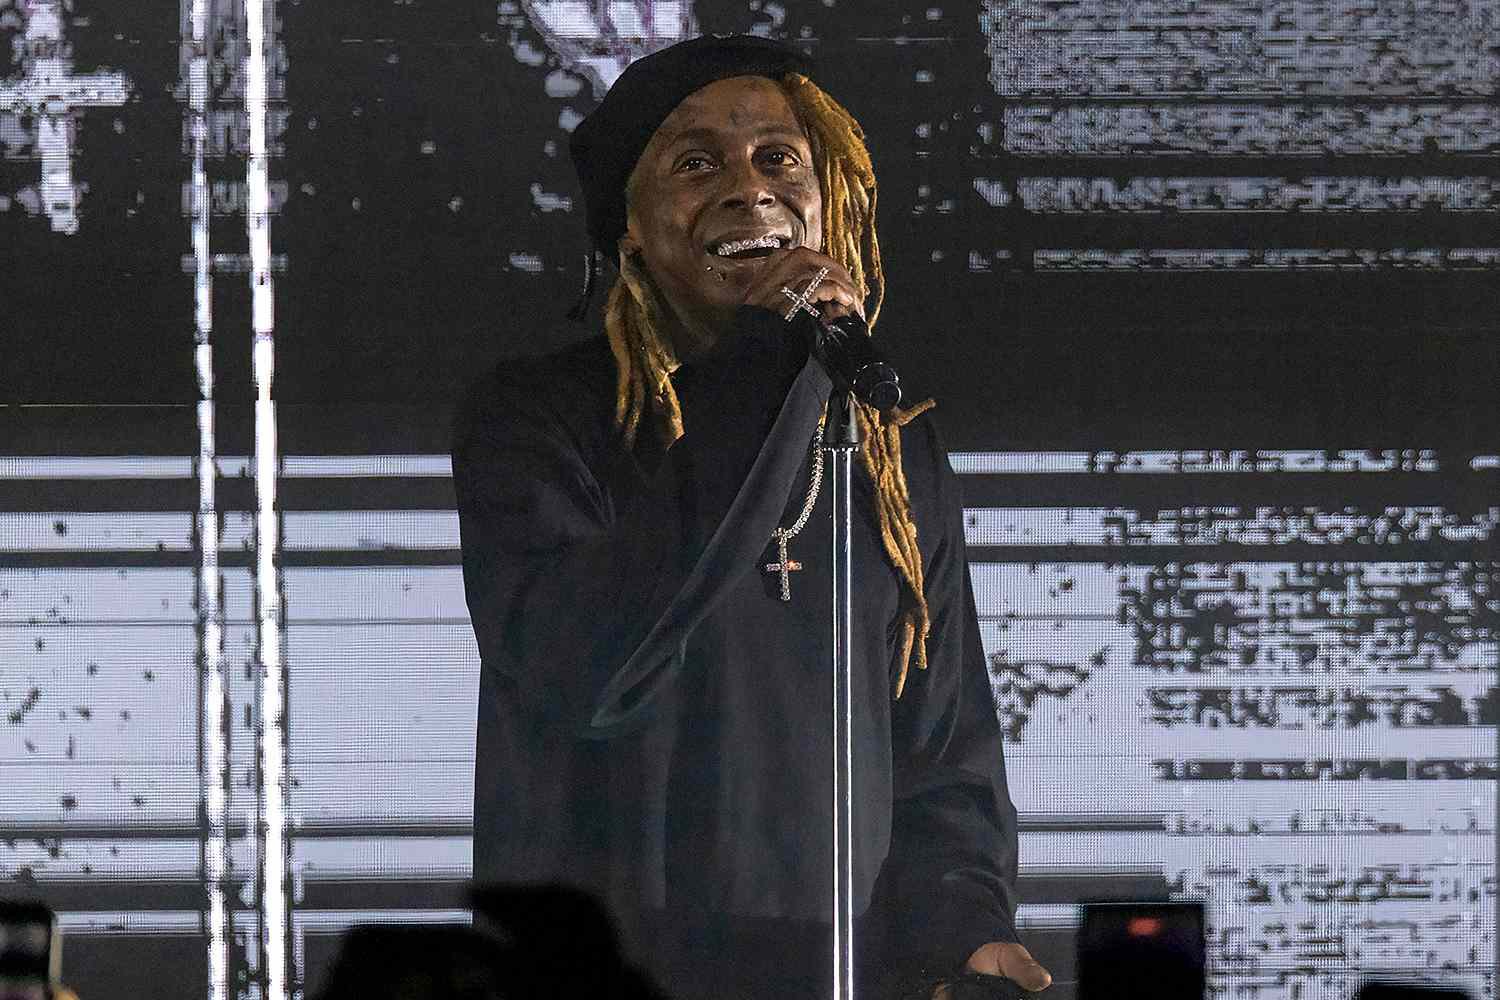 Lil Wayne Showed Up to 45 Mins Late to Show, Had Mic Turned Off After 15 Mins